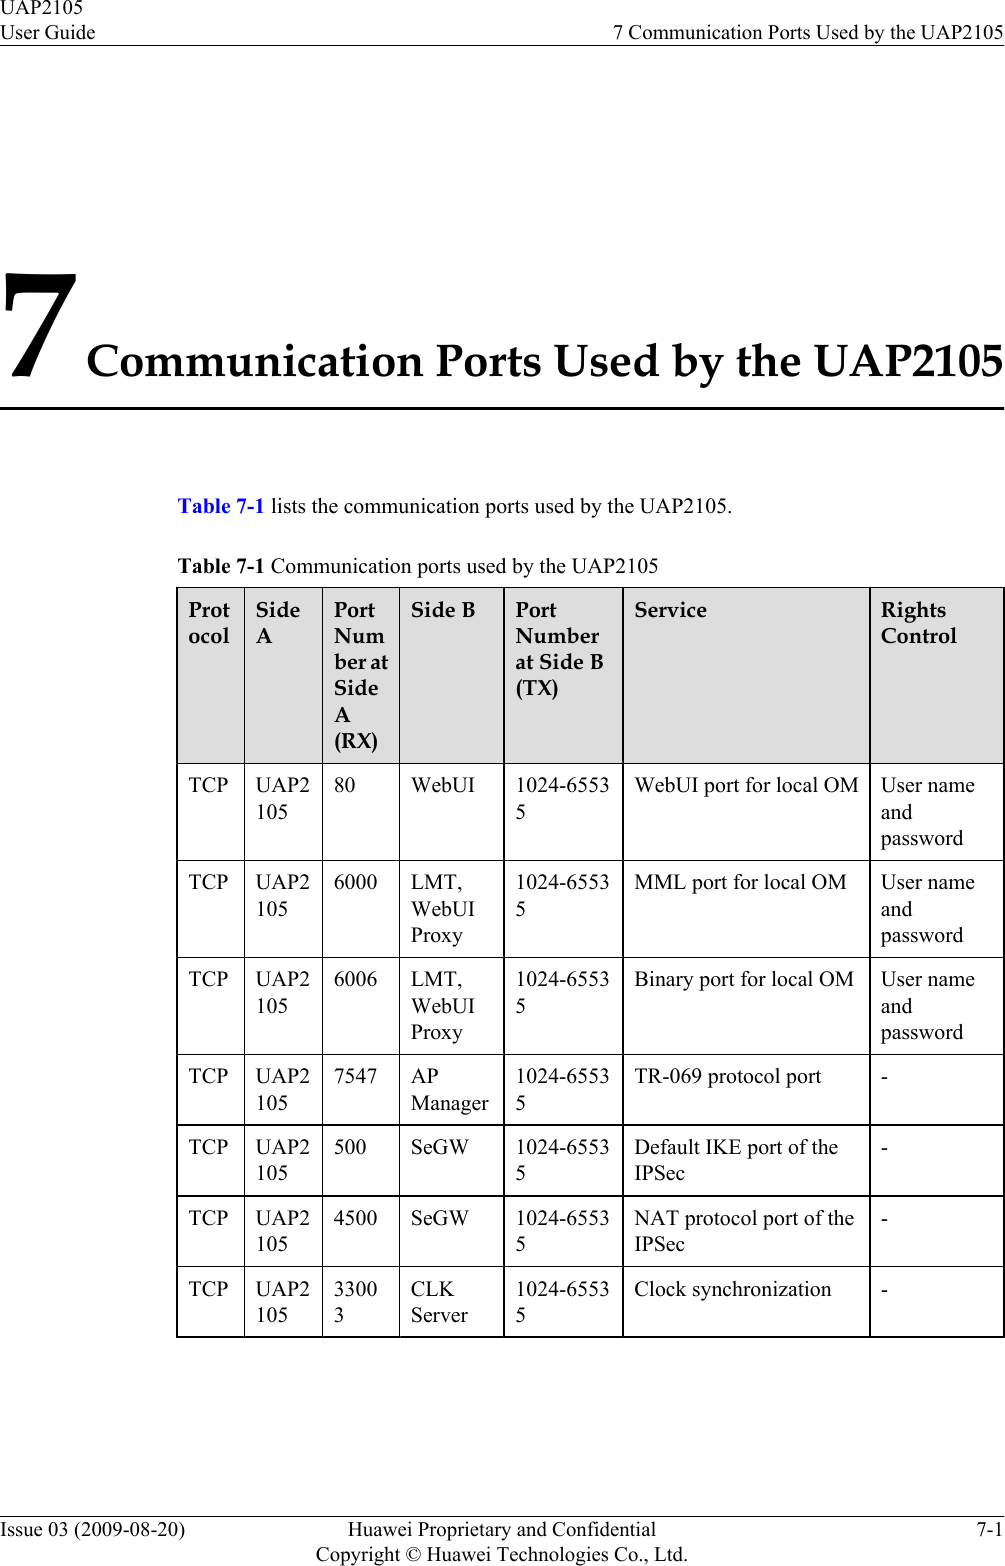 7 Communication Ports Used by the UAP2105Table 7-1 lists the communication ports used by the UAP2105.Table 7-1 Communication ports used by the UAP2105ProtocolSideAPortNumber atSideA(RX)Side B PortNumberat Side B(TX)Service RightsControlTCP UAP210580 WebUI 1024-65535WebUI port for local OM User nameandpasswordTCP UAP21056000 LMT,WebUIProxy1024-65535MML port for local OM User nameandpasswordTCP UAP21056006 LMT,WebUIProxy1024-65535Binary port for local OM User nameandpasswordTCP UAP21057547 APManager1024-65535TR-069 protocol port -TCP UAP2105500 SeGW 1024-65535Default IKE port of theIPSec-TCP UAP21054500 SeGW 1024-65535NAT protocol port of theIPSec-TCP UAP210533003CLKServer1024-65535Clock synchronization -UAP2105User Guide 7 Communication Ports Used by the UAP2105Issue 03 (2009-08-20) Huawei Proprietary and ConfidentialCopyright © Huawei Technologies Co., Ltd.7-1